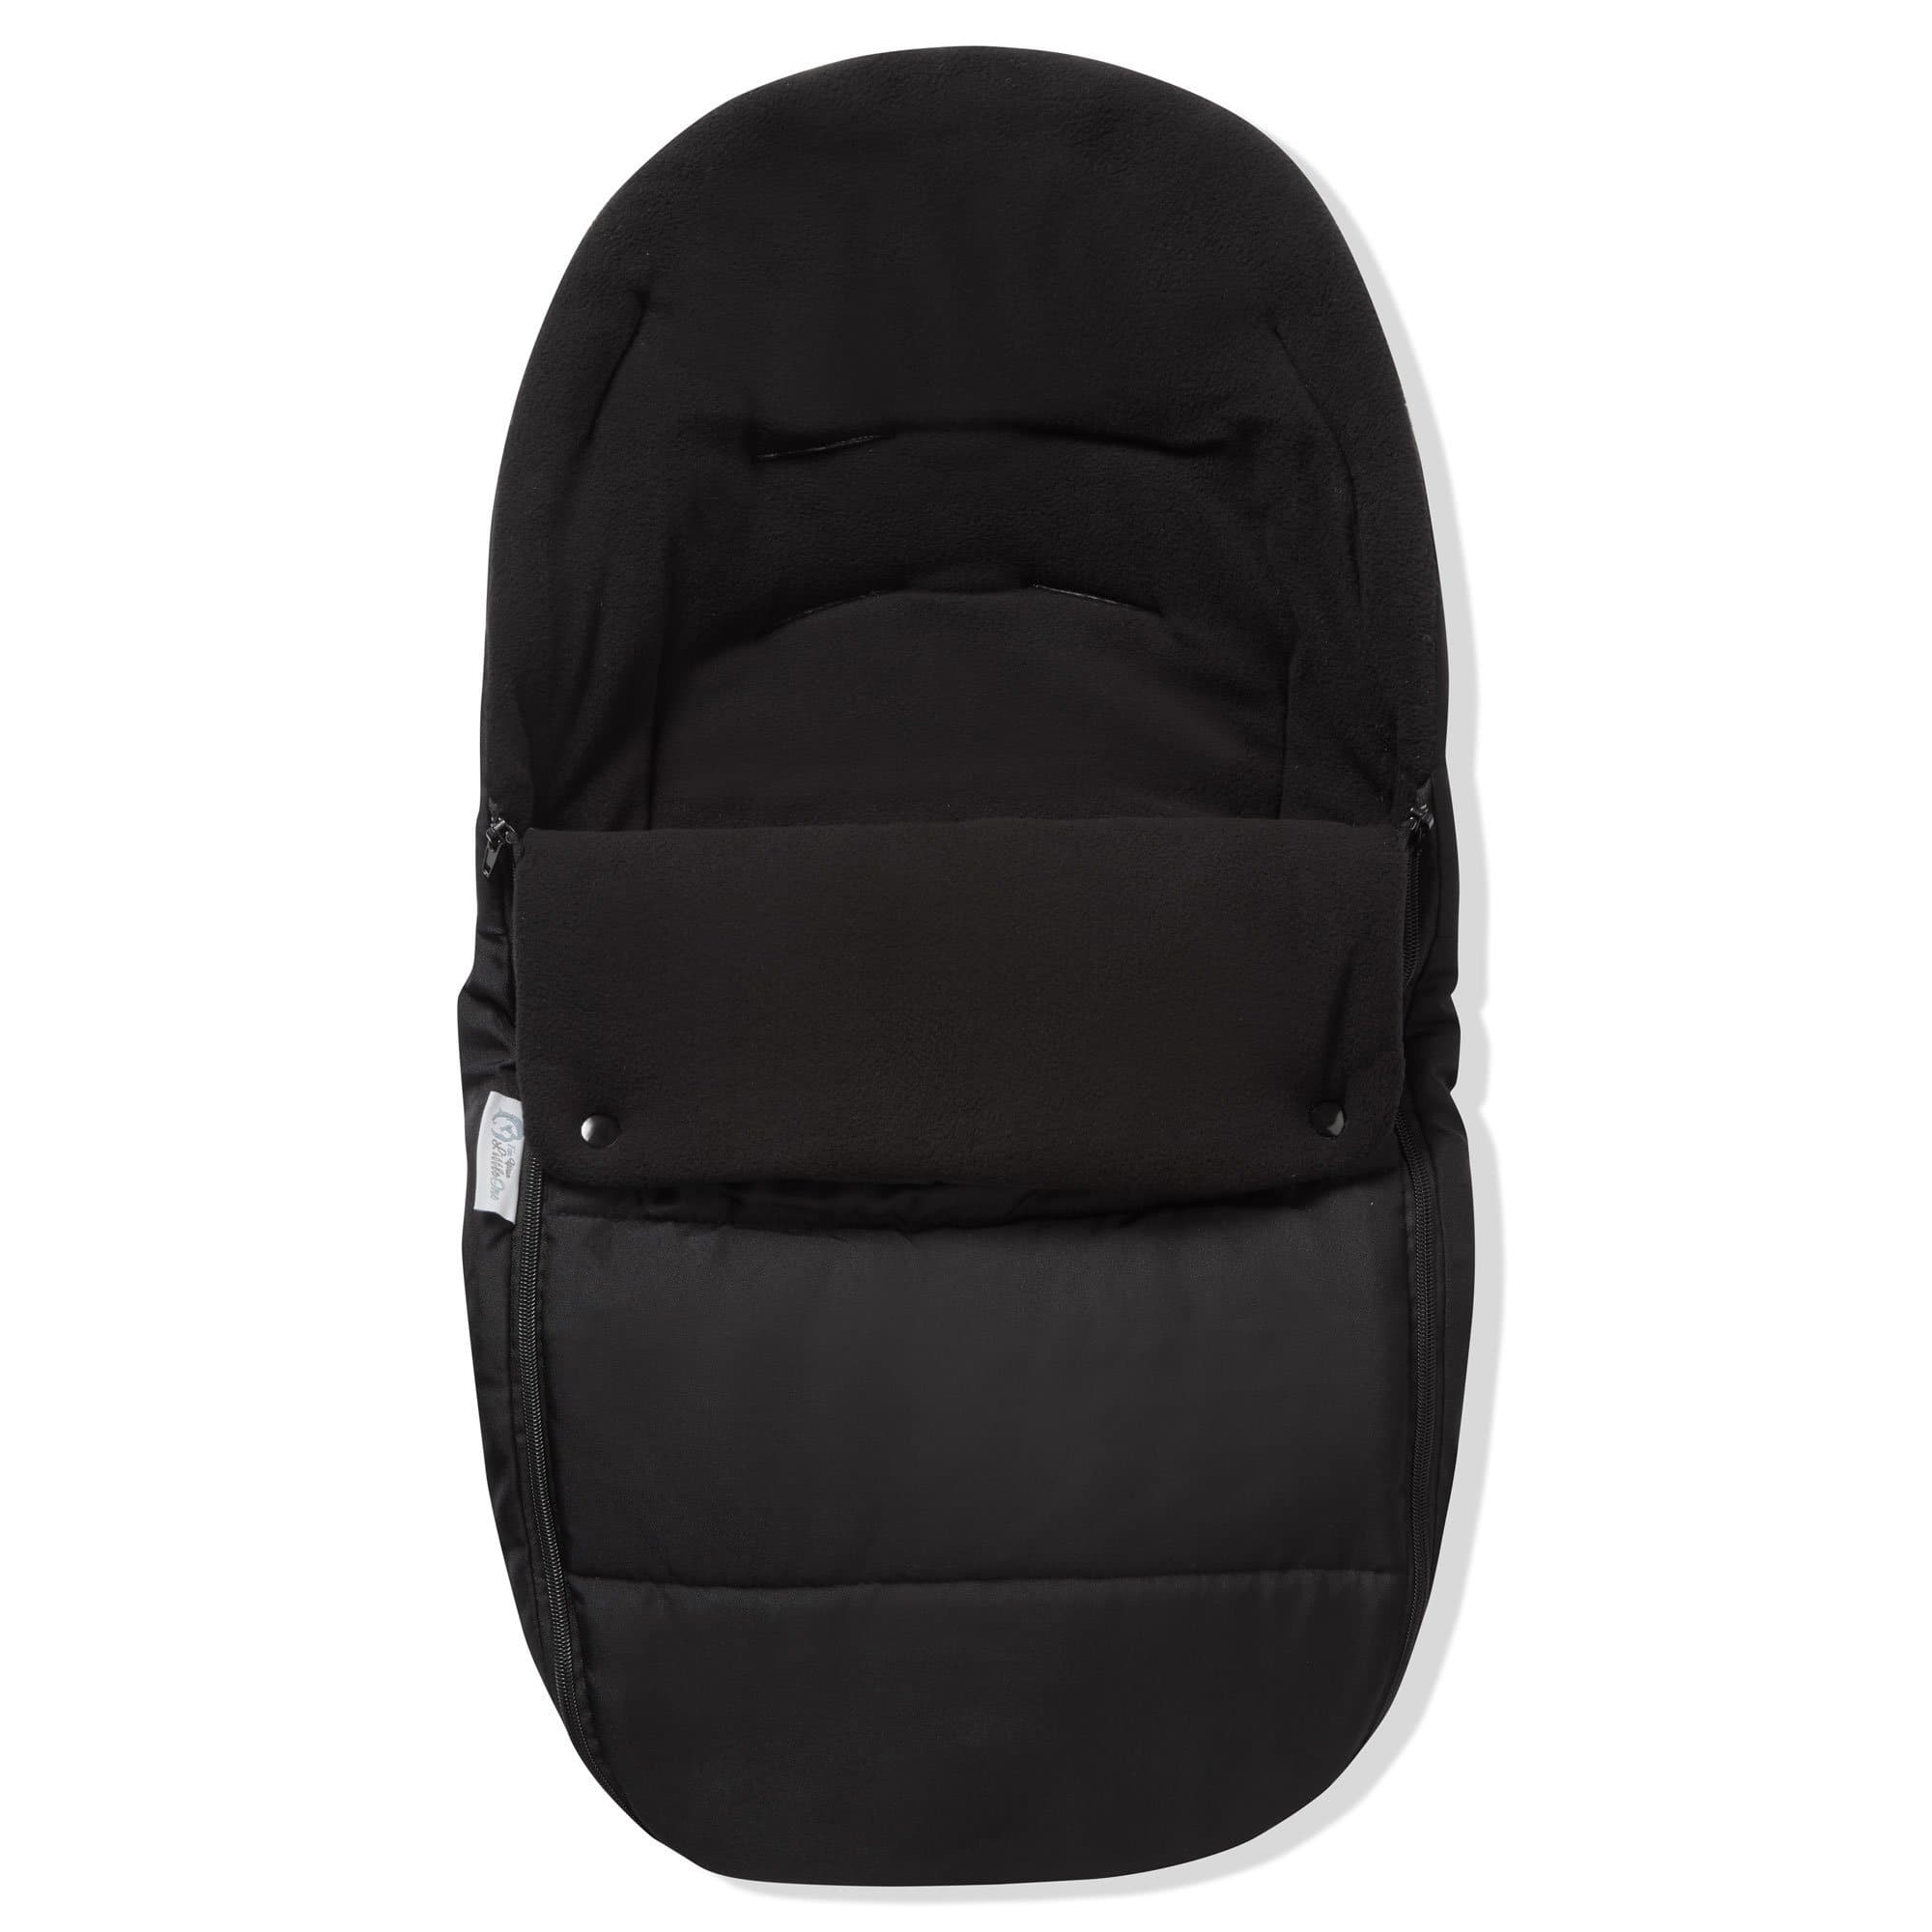 Premium Car Seat Footmuff / Cosy Toes Compatible with Britax - Black Jack / Fits All Models | For Your Little One